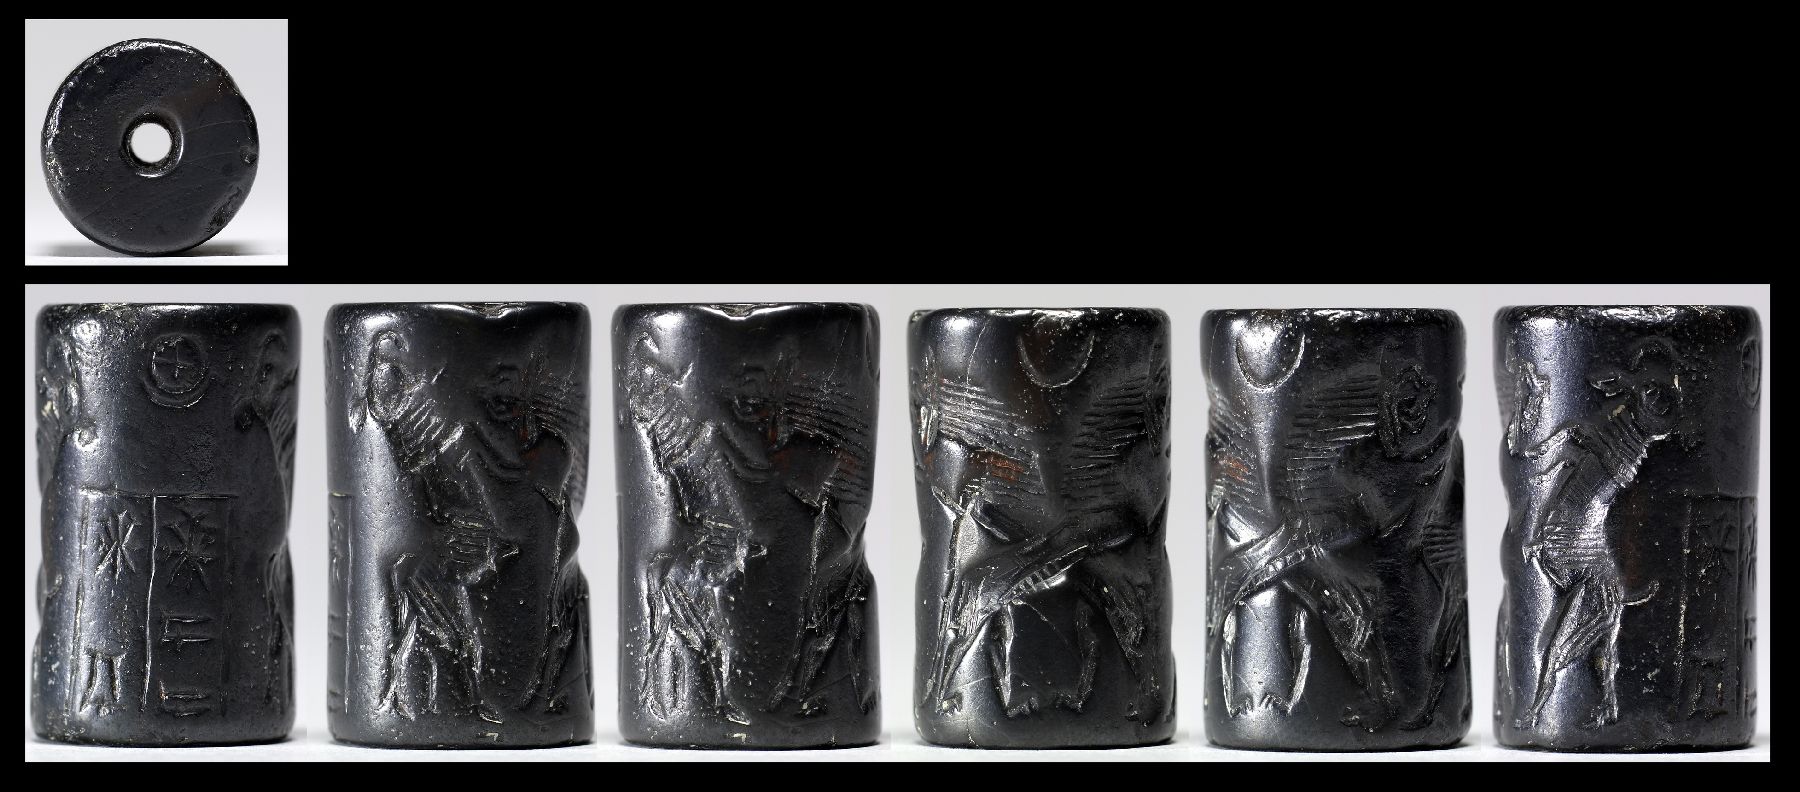 Image for Cylinder Seal with an Animal Contest Scene and an Inscription